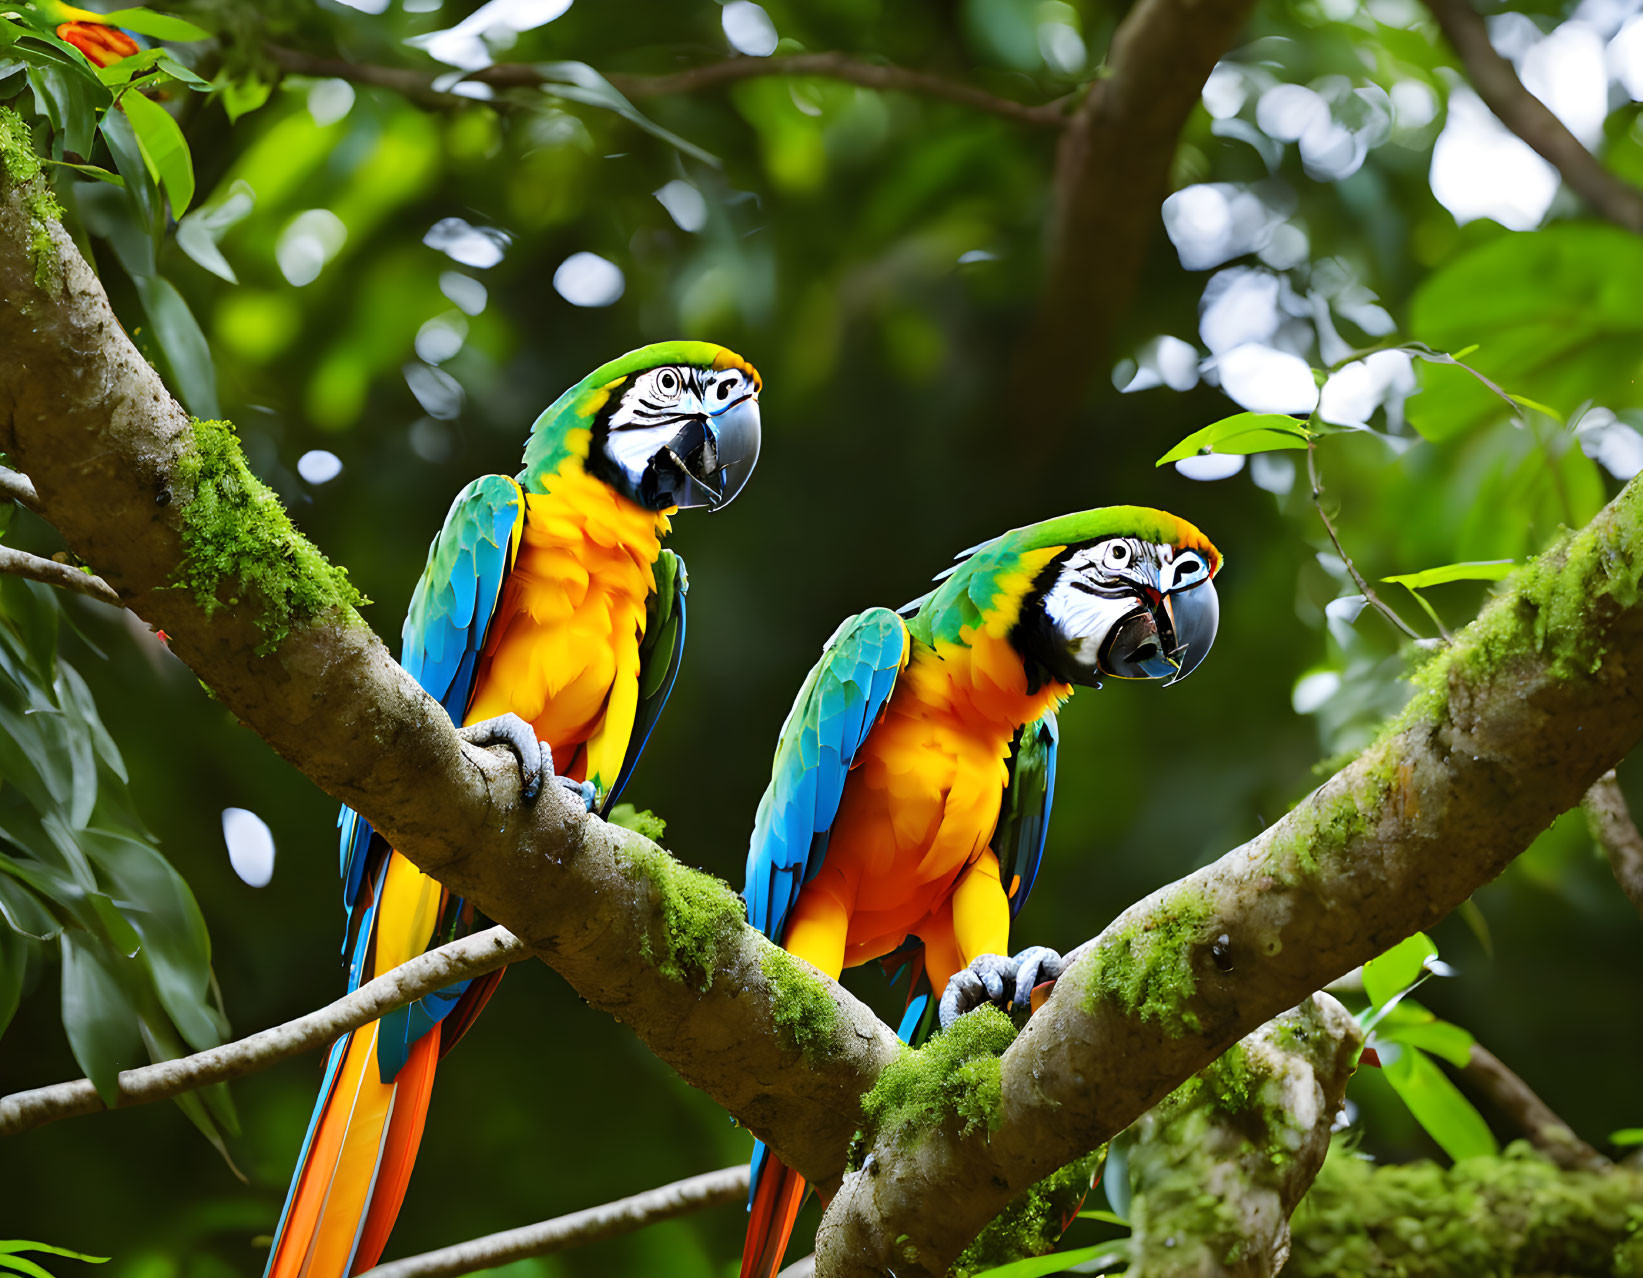 Vibrant Macaws on Moss-Covered Branch in Green Forest